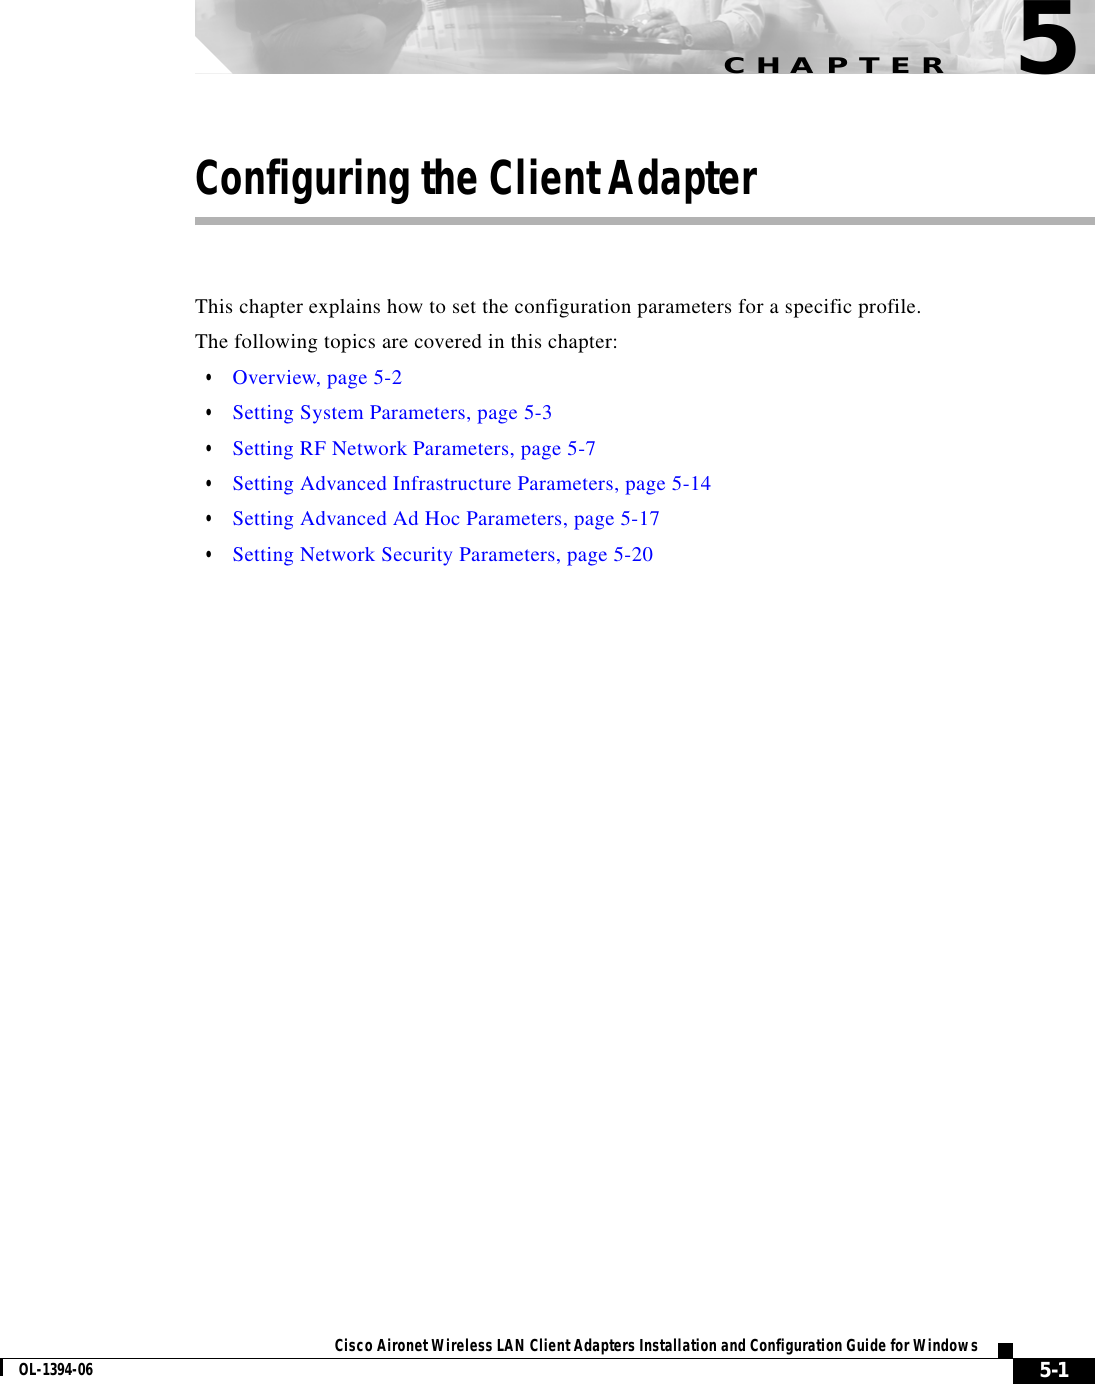 CHAPTER5-1Cisco Aironet Wireless LAN Client Adapters Installation and Configuration Guide for WindowsOL-1394-065Configuring the Client AdapterThis chapter explains how to set the configuration parameters for a specific profile.The following topics are covered in this chapter:•Overview, page 5-2•Setting System Parameters, page 5-3•Setting RF Network Parameters, page 5-7•Setting Advanced Infrastructure Parameters, page 5-14•Setting Advanced Ad Hoc Parameters, page 5-17•Setting Network Security Parameters, page 5-20